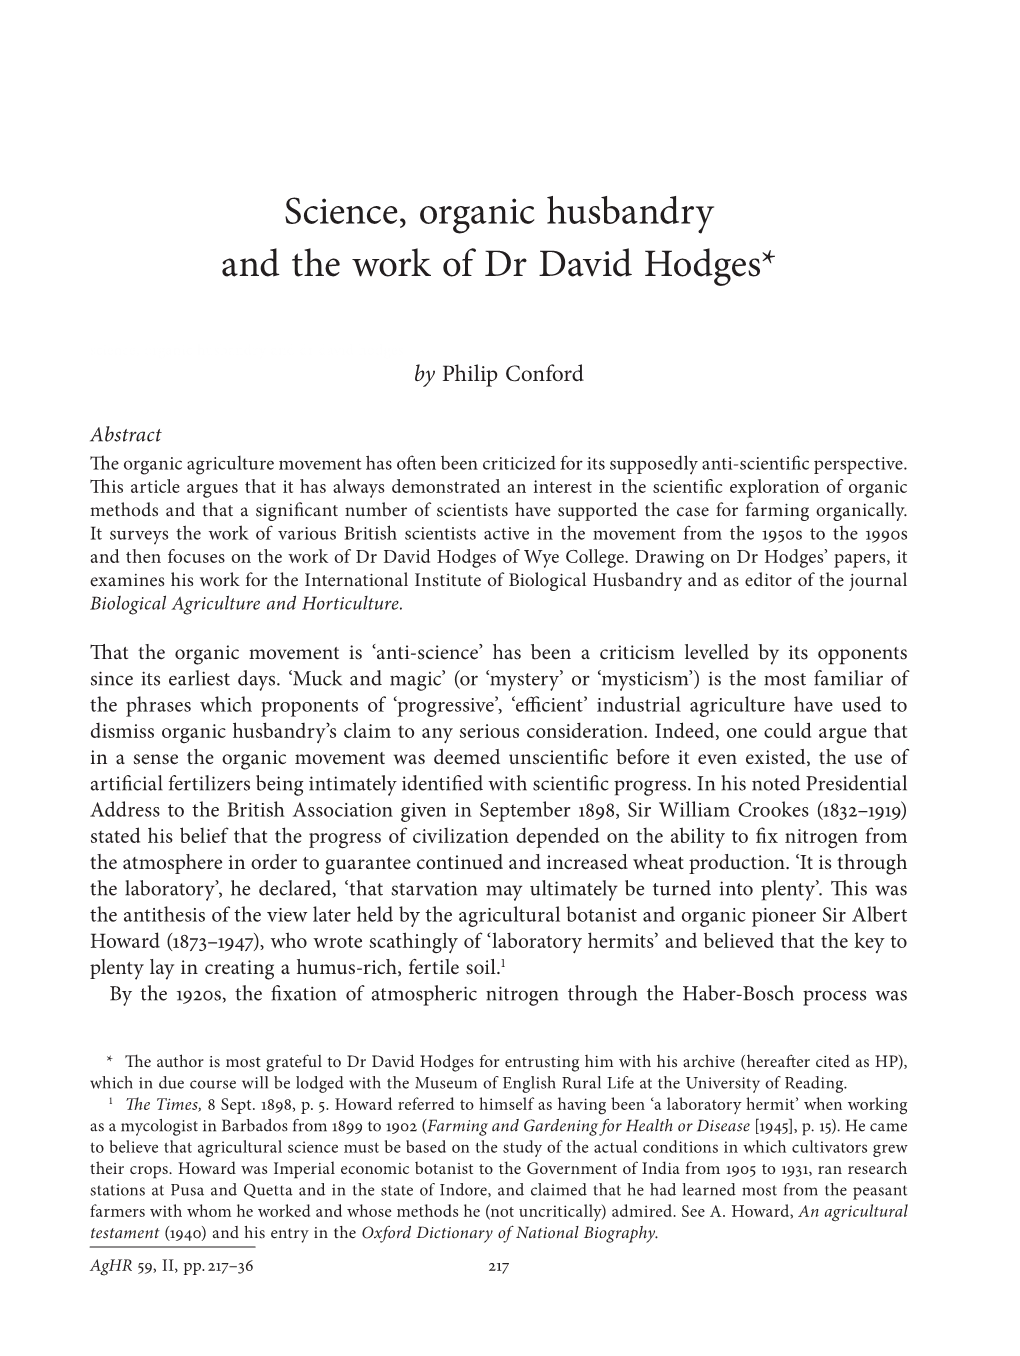 Science, Organic Husbandry and the Work of Dr David Hodges*